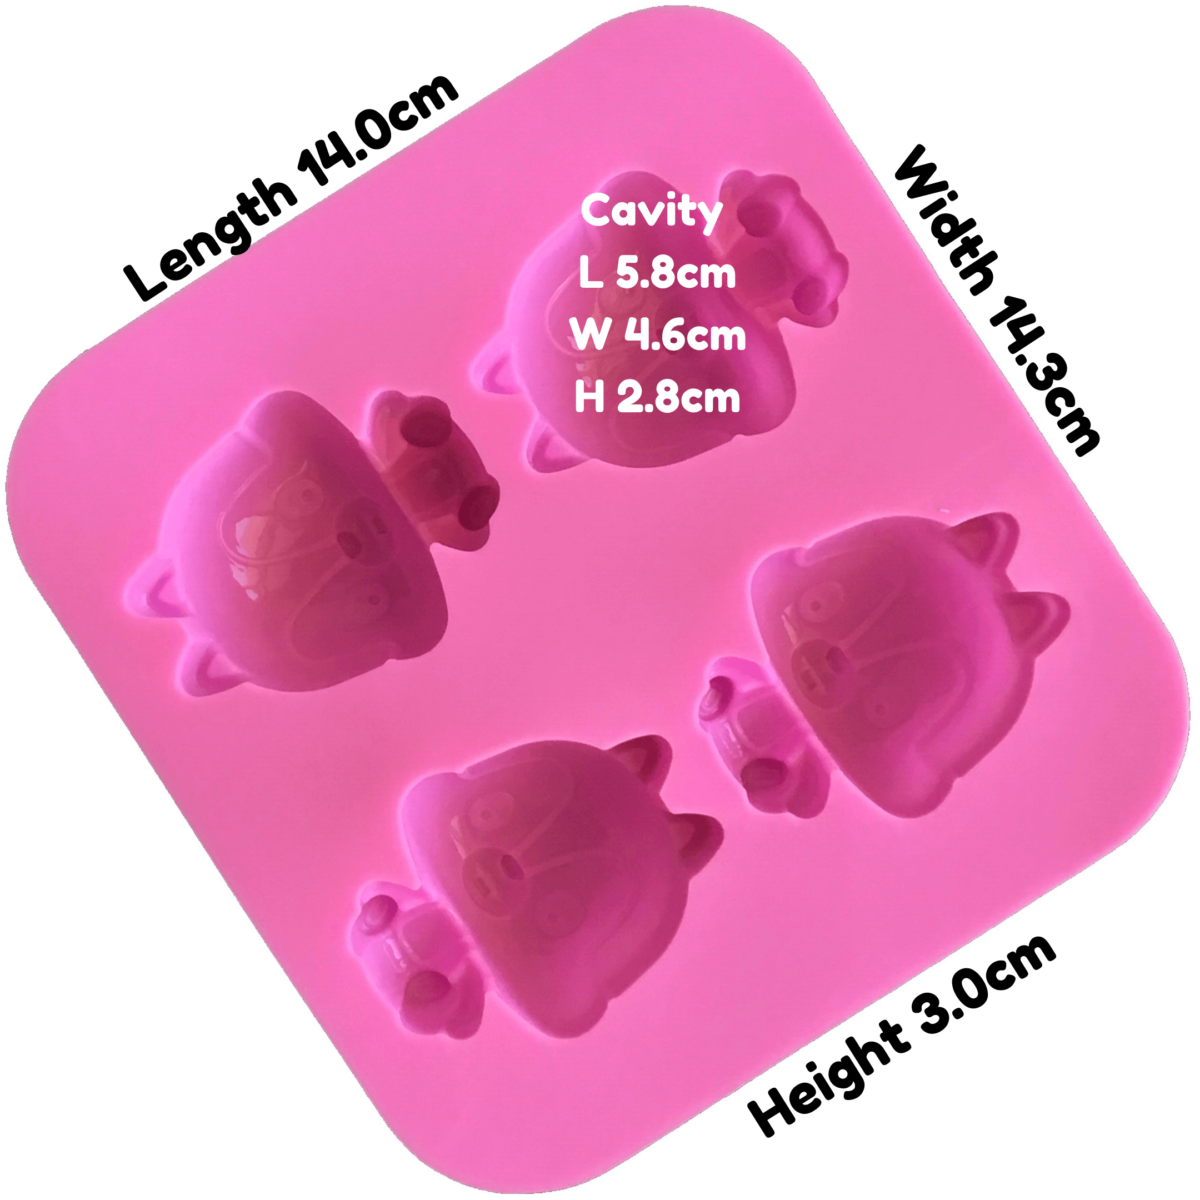 written dimensions of pink silicone mould with four identical cavities displaying a cartoon chipmunk